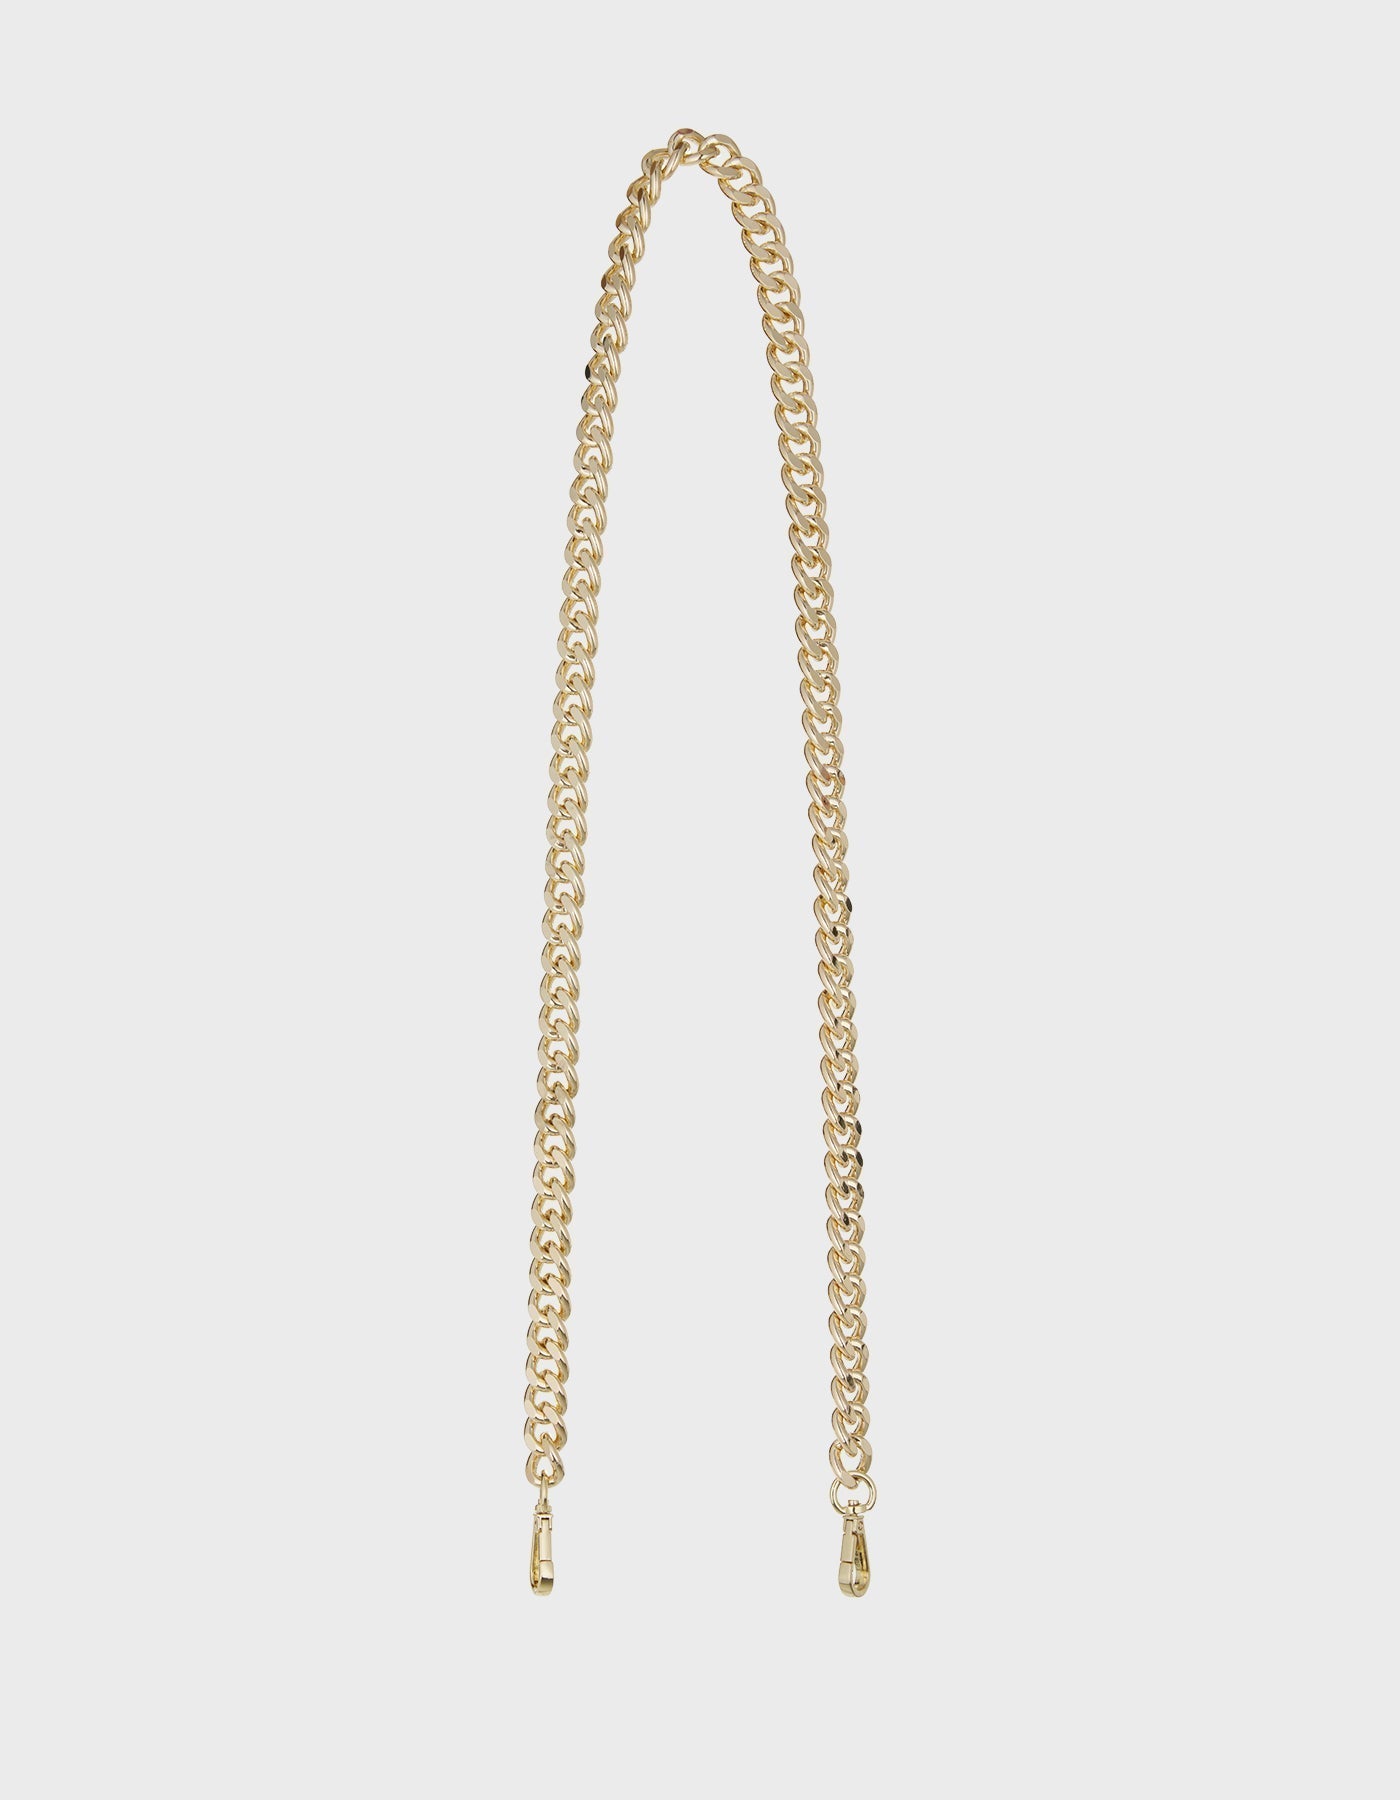 HiVa Atelier | Brass Thick Gold Crossbody Strap Thick Long | Beautiful and Versatile